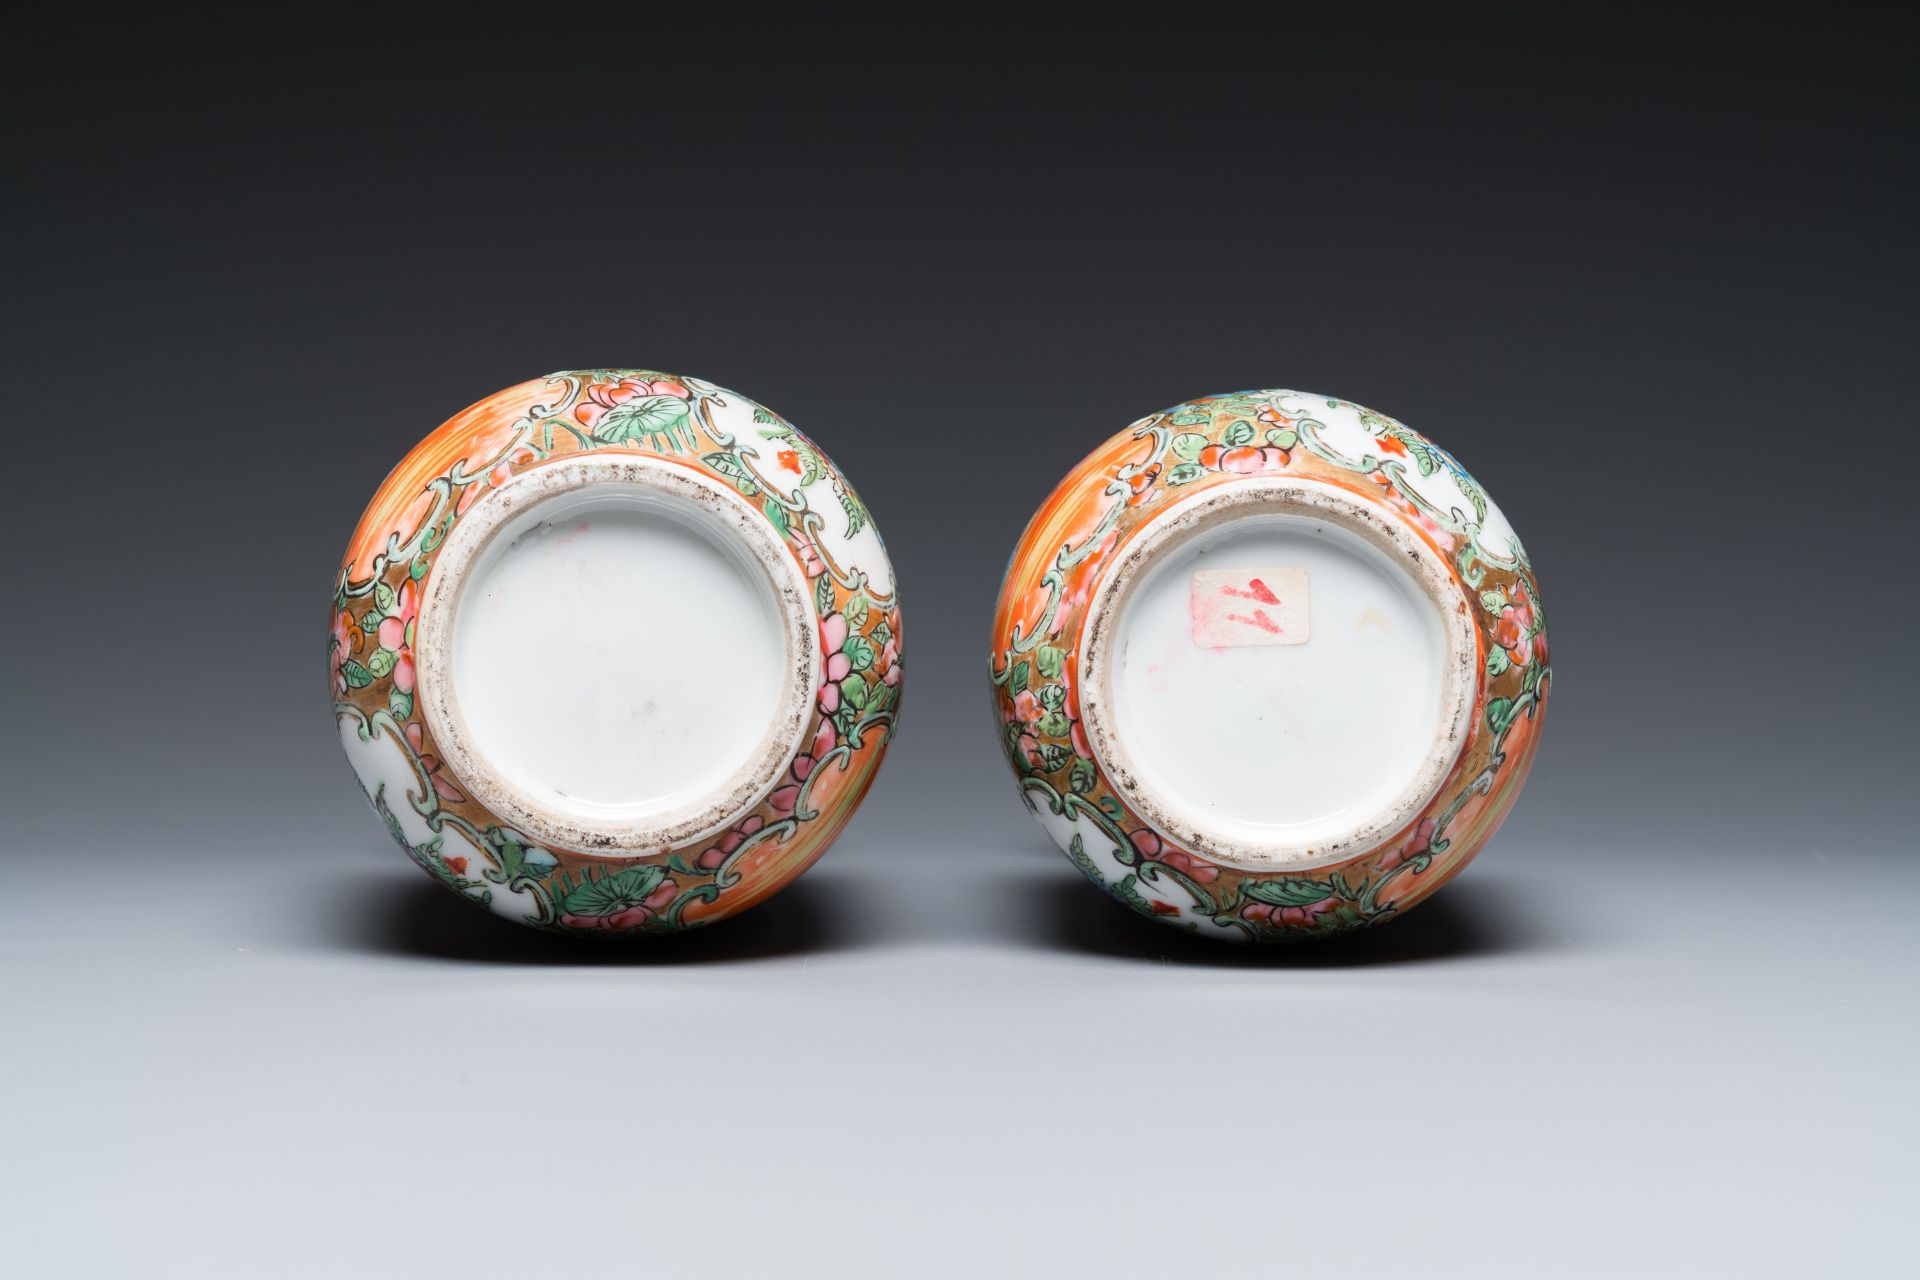 A collection of 28 Chinese Canton famille rose wares, 19th C. - Image 16 of 16